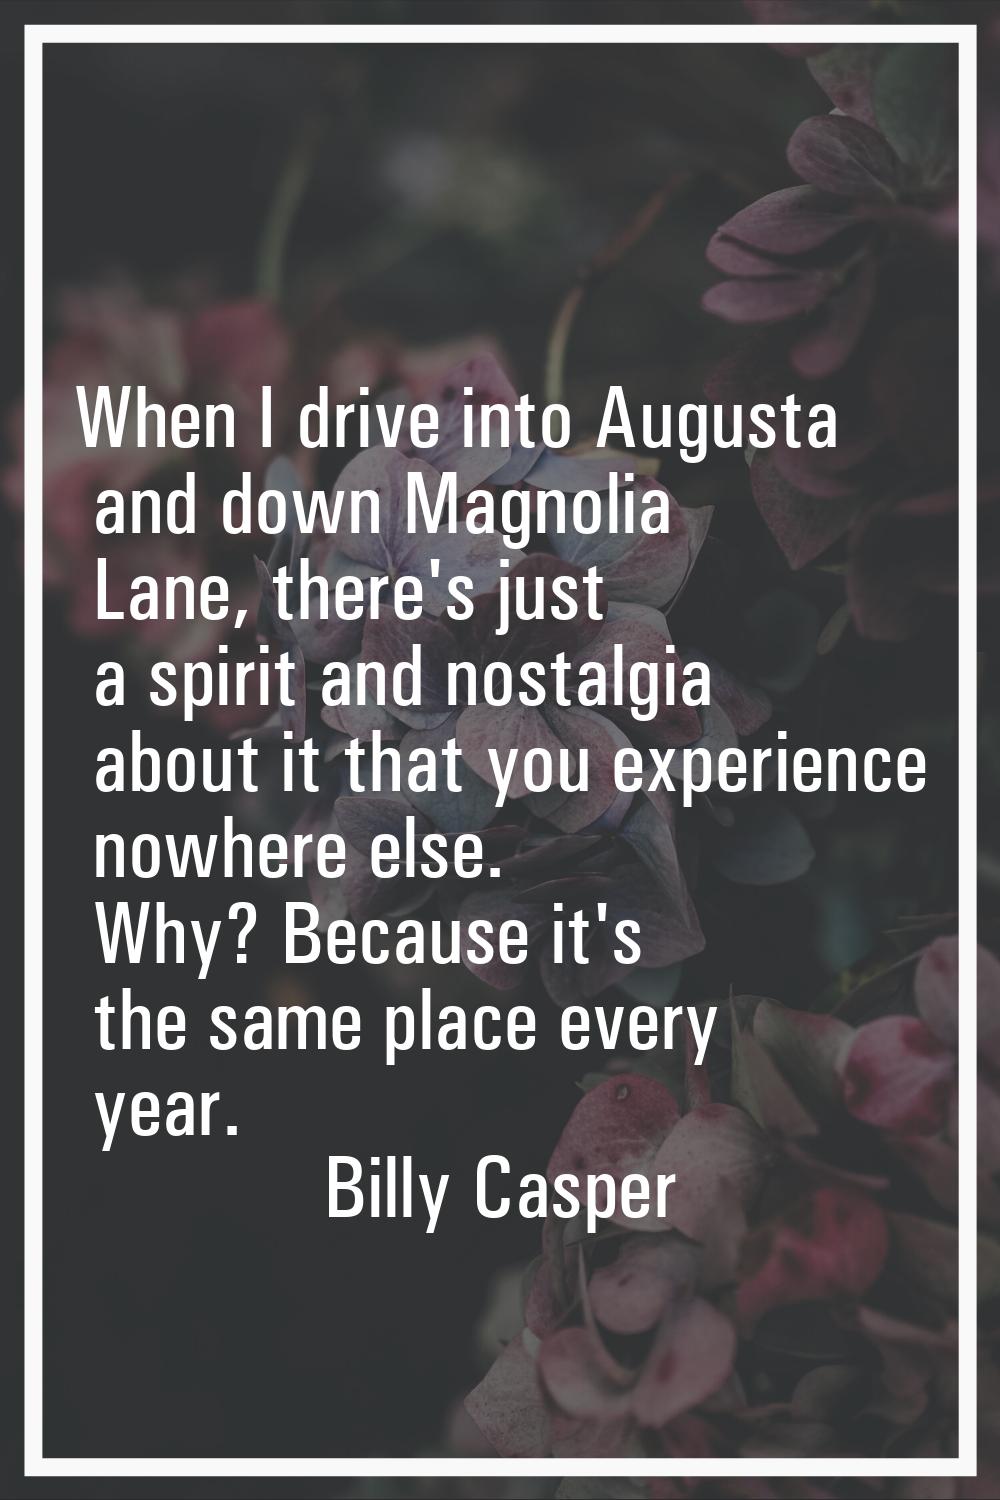 When I drive into Augusta and down Magnolia Lane, there's just a spirit and nostalgia about it that